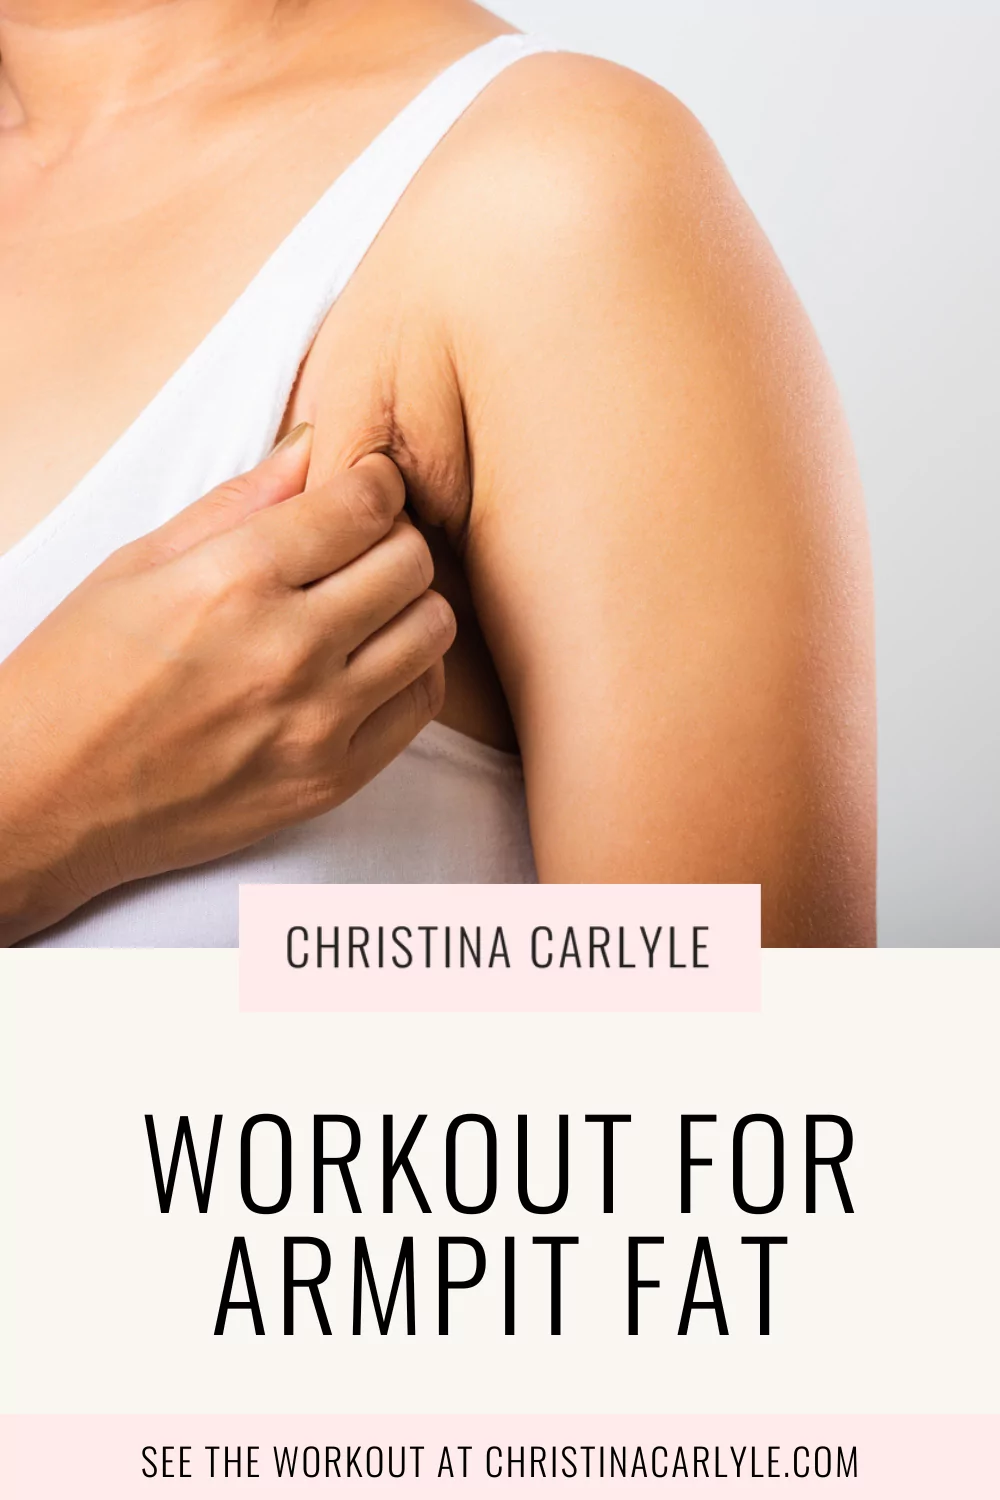 a picture of a woman squeezing her armpit fat and text that says Workout for Armpit Fat